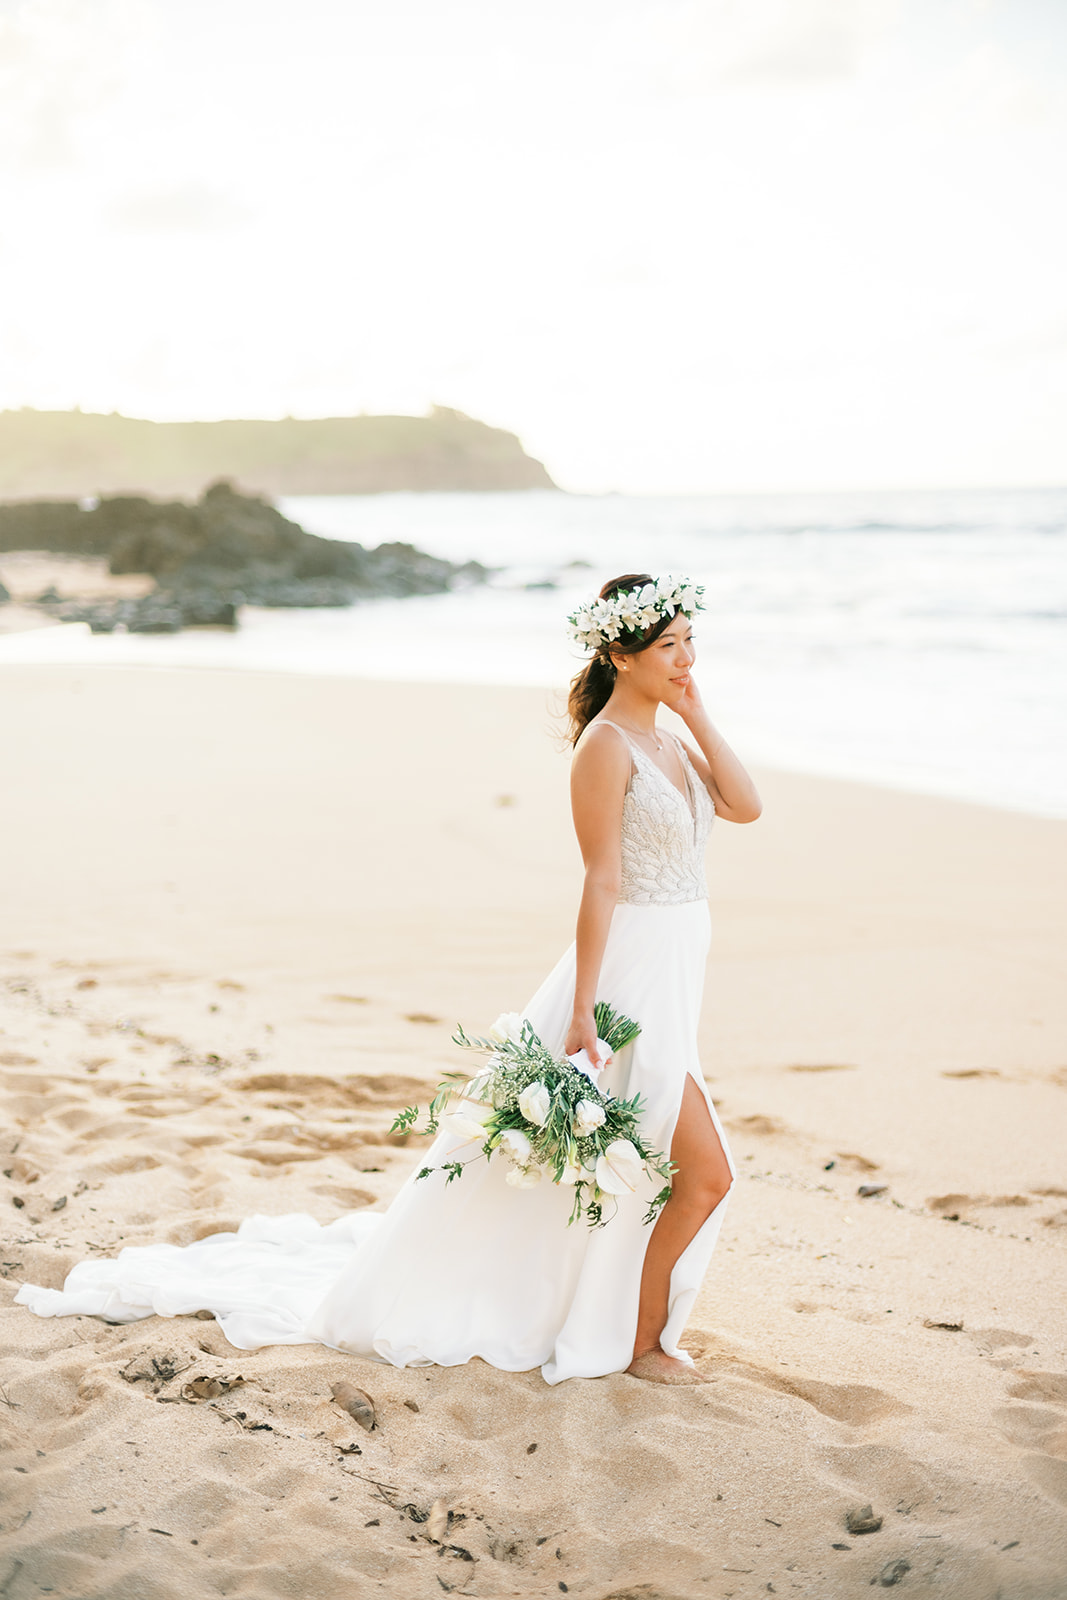 portrait of a bride in a white dress holding a bouquet on a sandy beach fixing her air, looking to the side with a smile